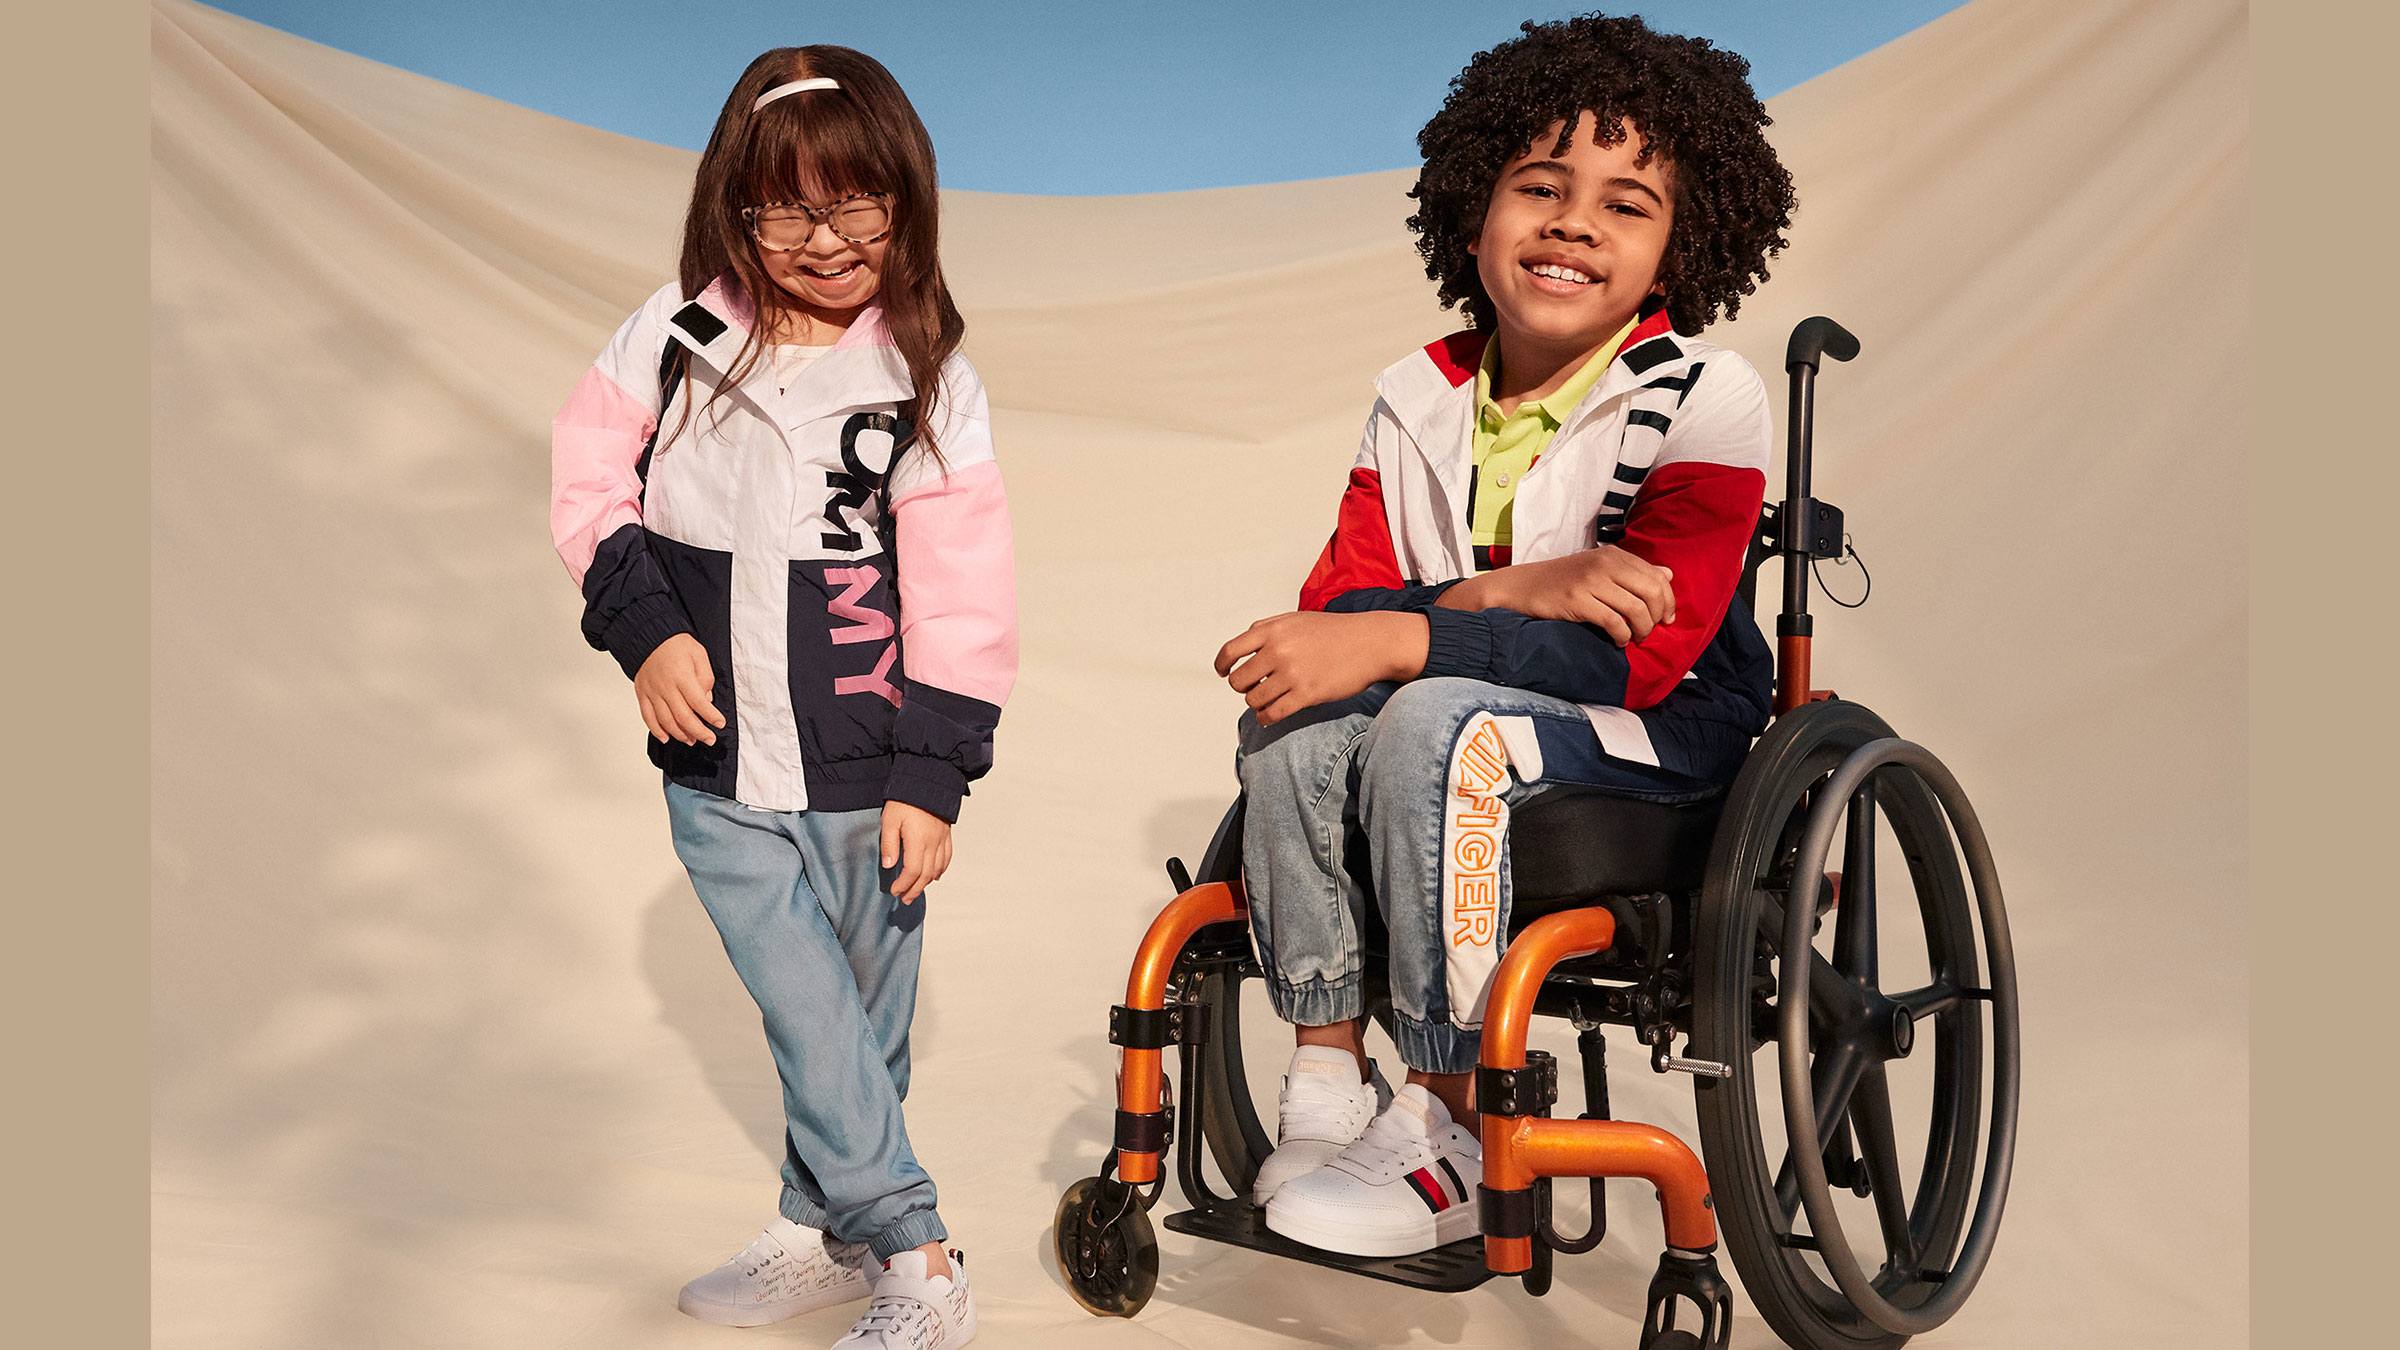 Two visibly disabled children, one boy and one girl, sit in front of a white backdrop wearing Tommy Hilfiger's adaptivewear line. 